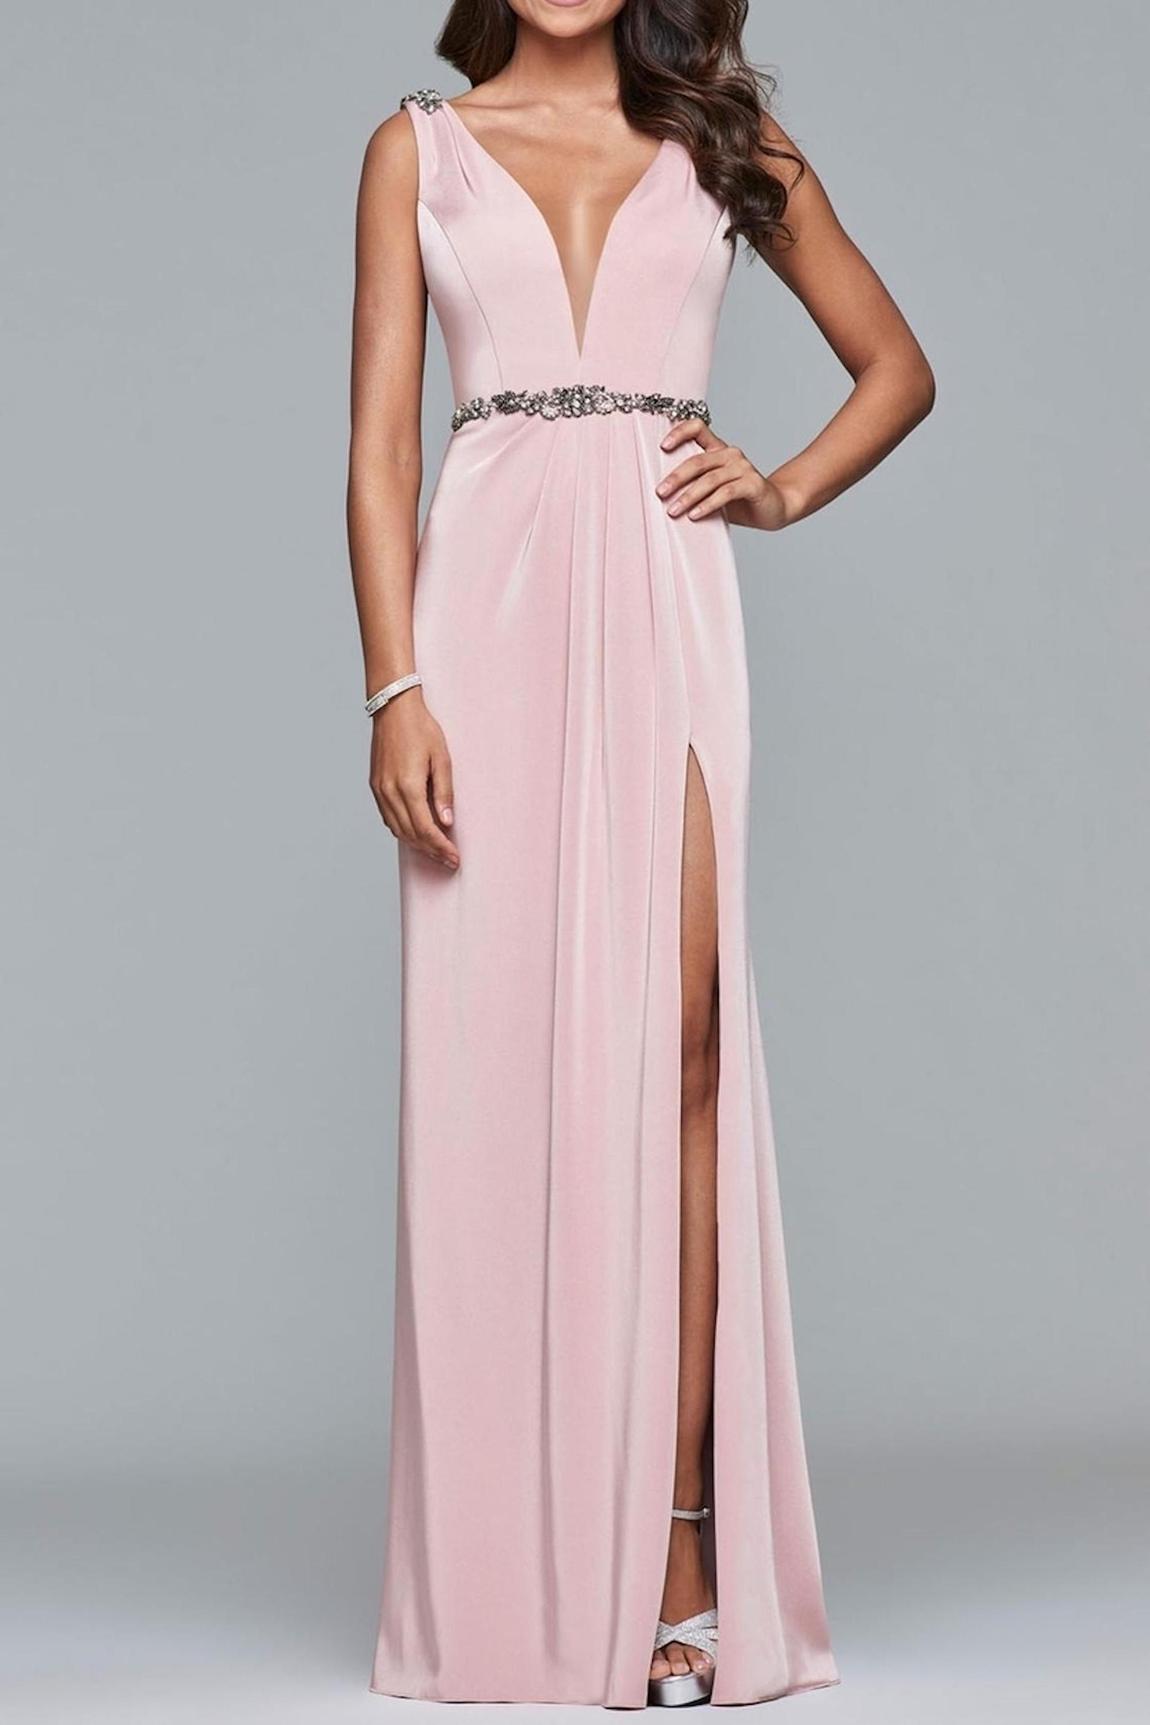 Style WAISTLINE ACCENTED GOWN Faviana Size 4 Prom Sequined Light Pink Side Slit Dress on Queenly